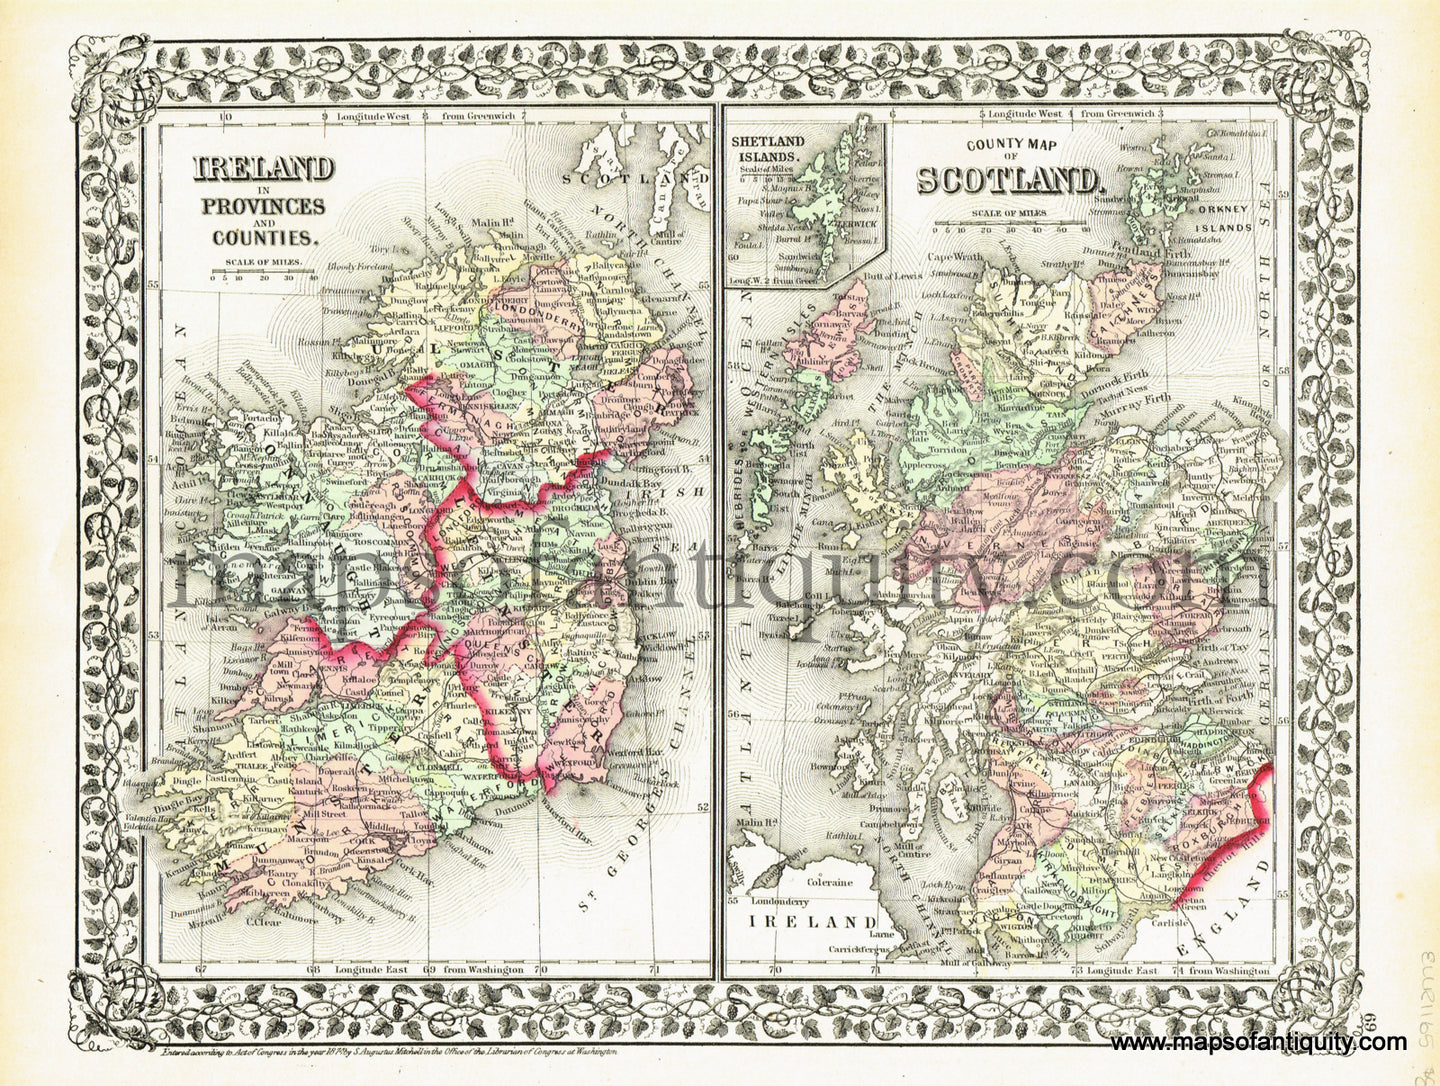 Antique-Hand-Colored-Map-Ireland-in-Provinces-and-Counties-and-County-Map-of-Scotland-with-inset-of-Shetland-Islands.--Europe-Ireland-and-Scotland-1874-Mitchell-Maps-Of-Antiquity